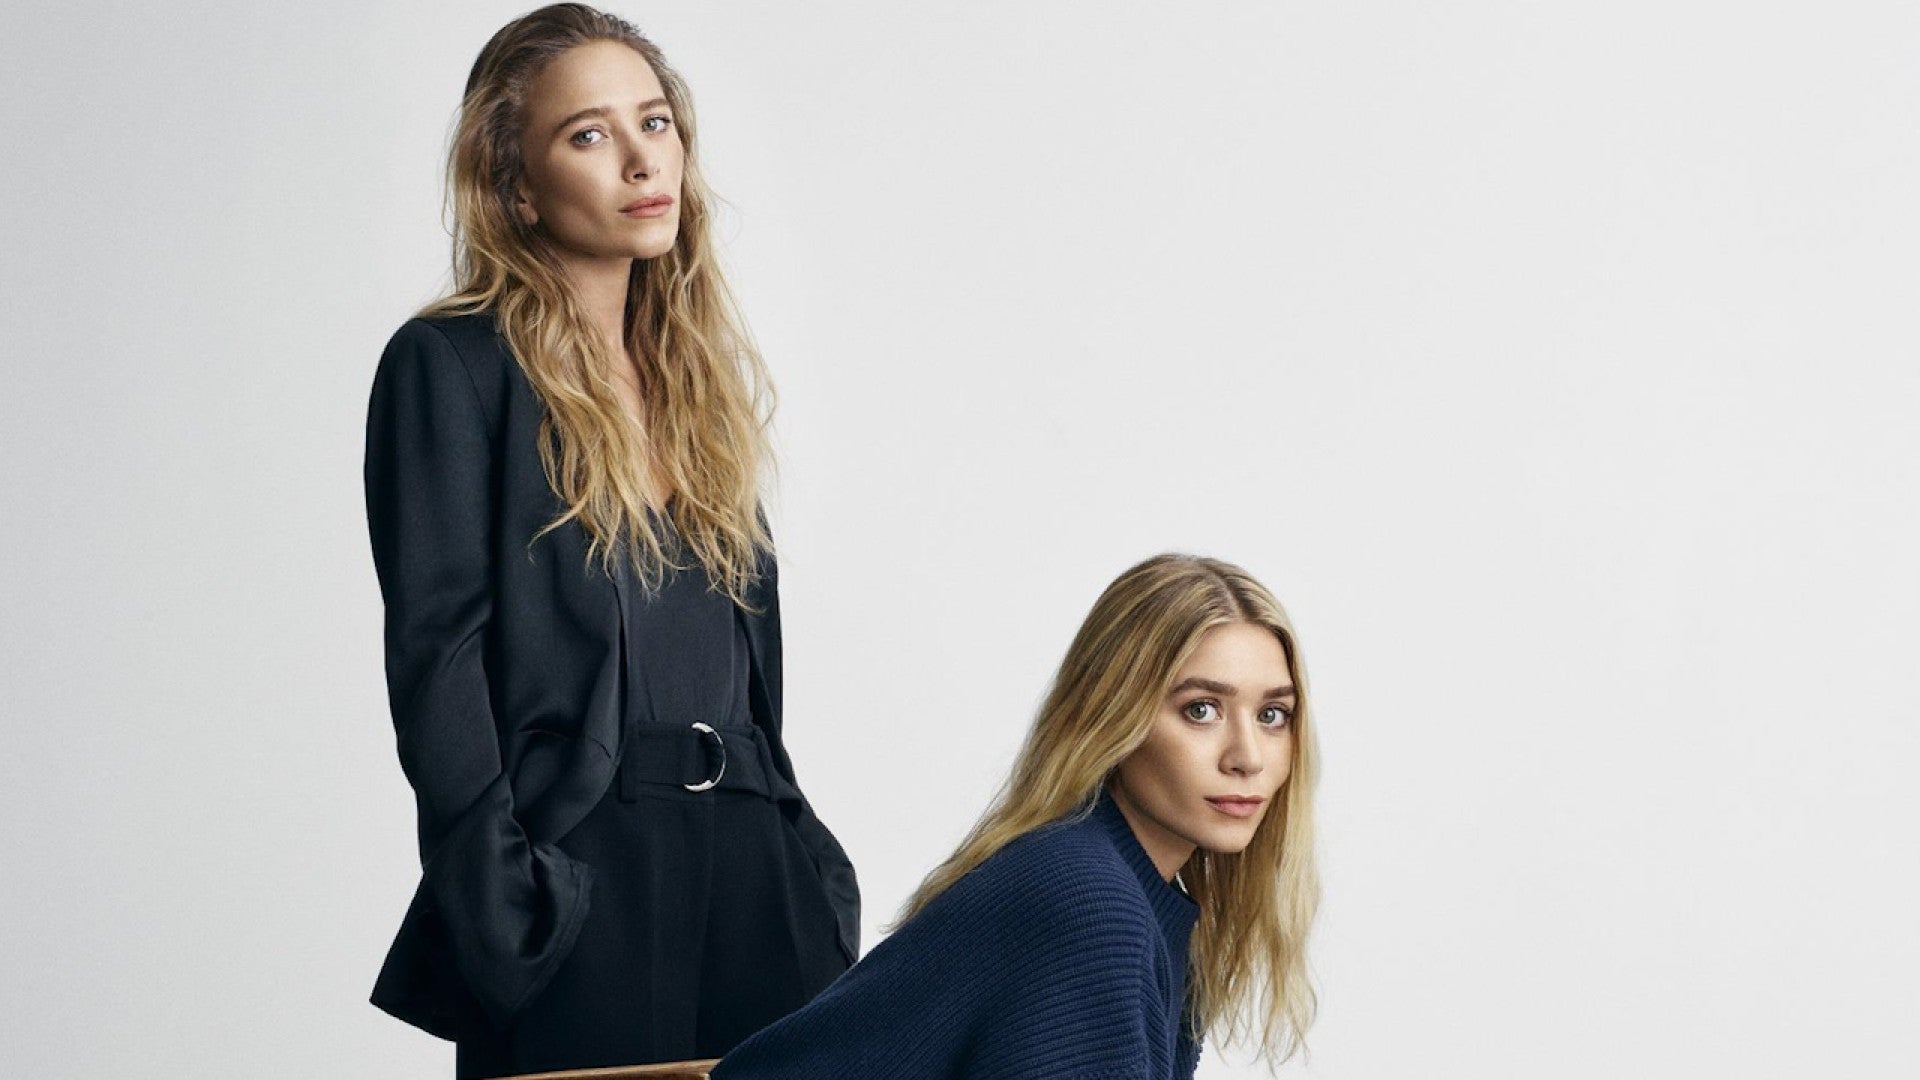 Mary-Kate and Olsen Open Up About Finding Balance and Avoiding Social Media Rare Interview | Entertainment